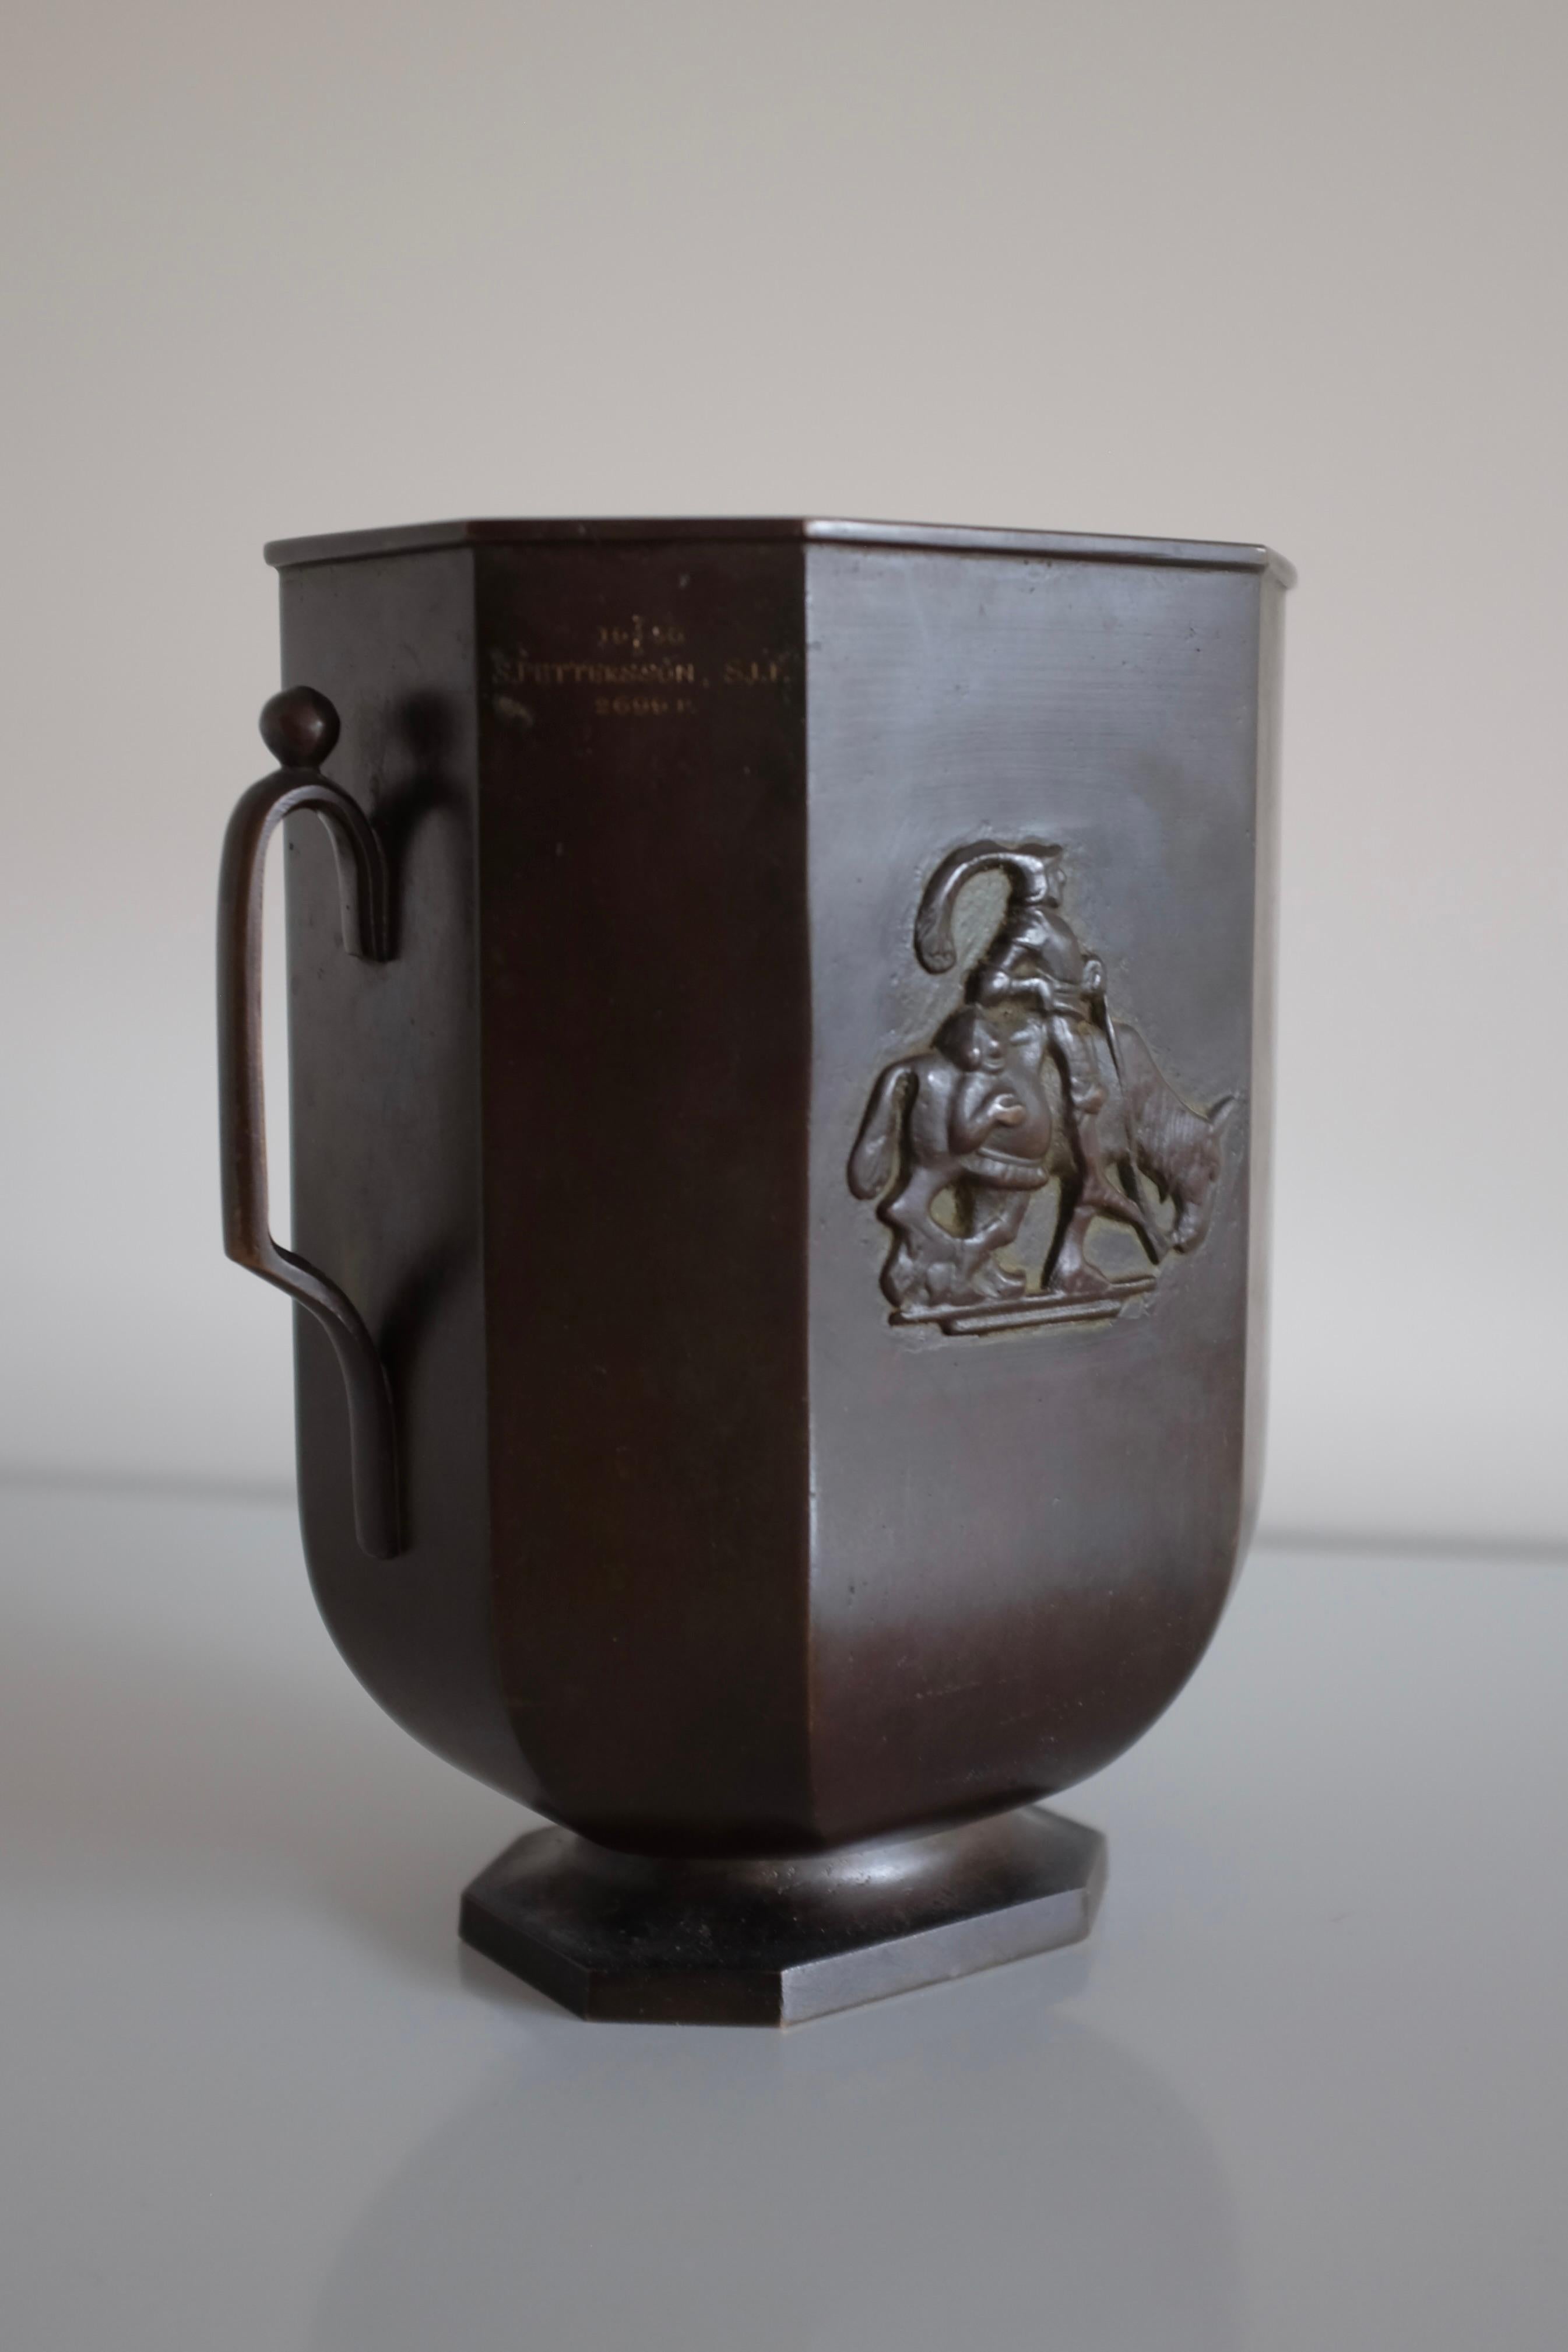 1930s Bronze Vase by Just Andersen for GAB. The design bare marks of the neoclassical Swedish grace style with an urn shaped body and elegant handles on both sides. With inscriptions on both sides. In a good condition with age appropriate